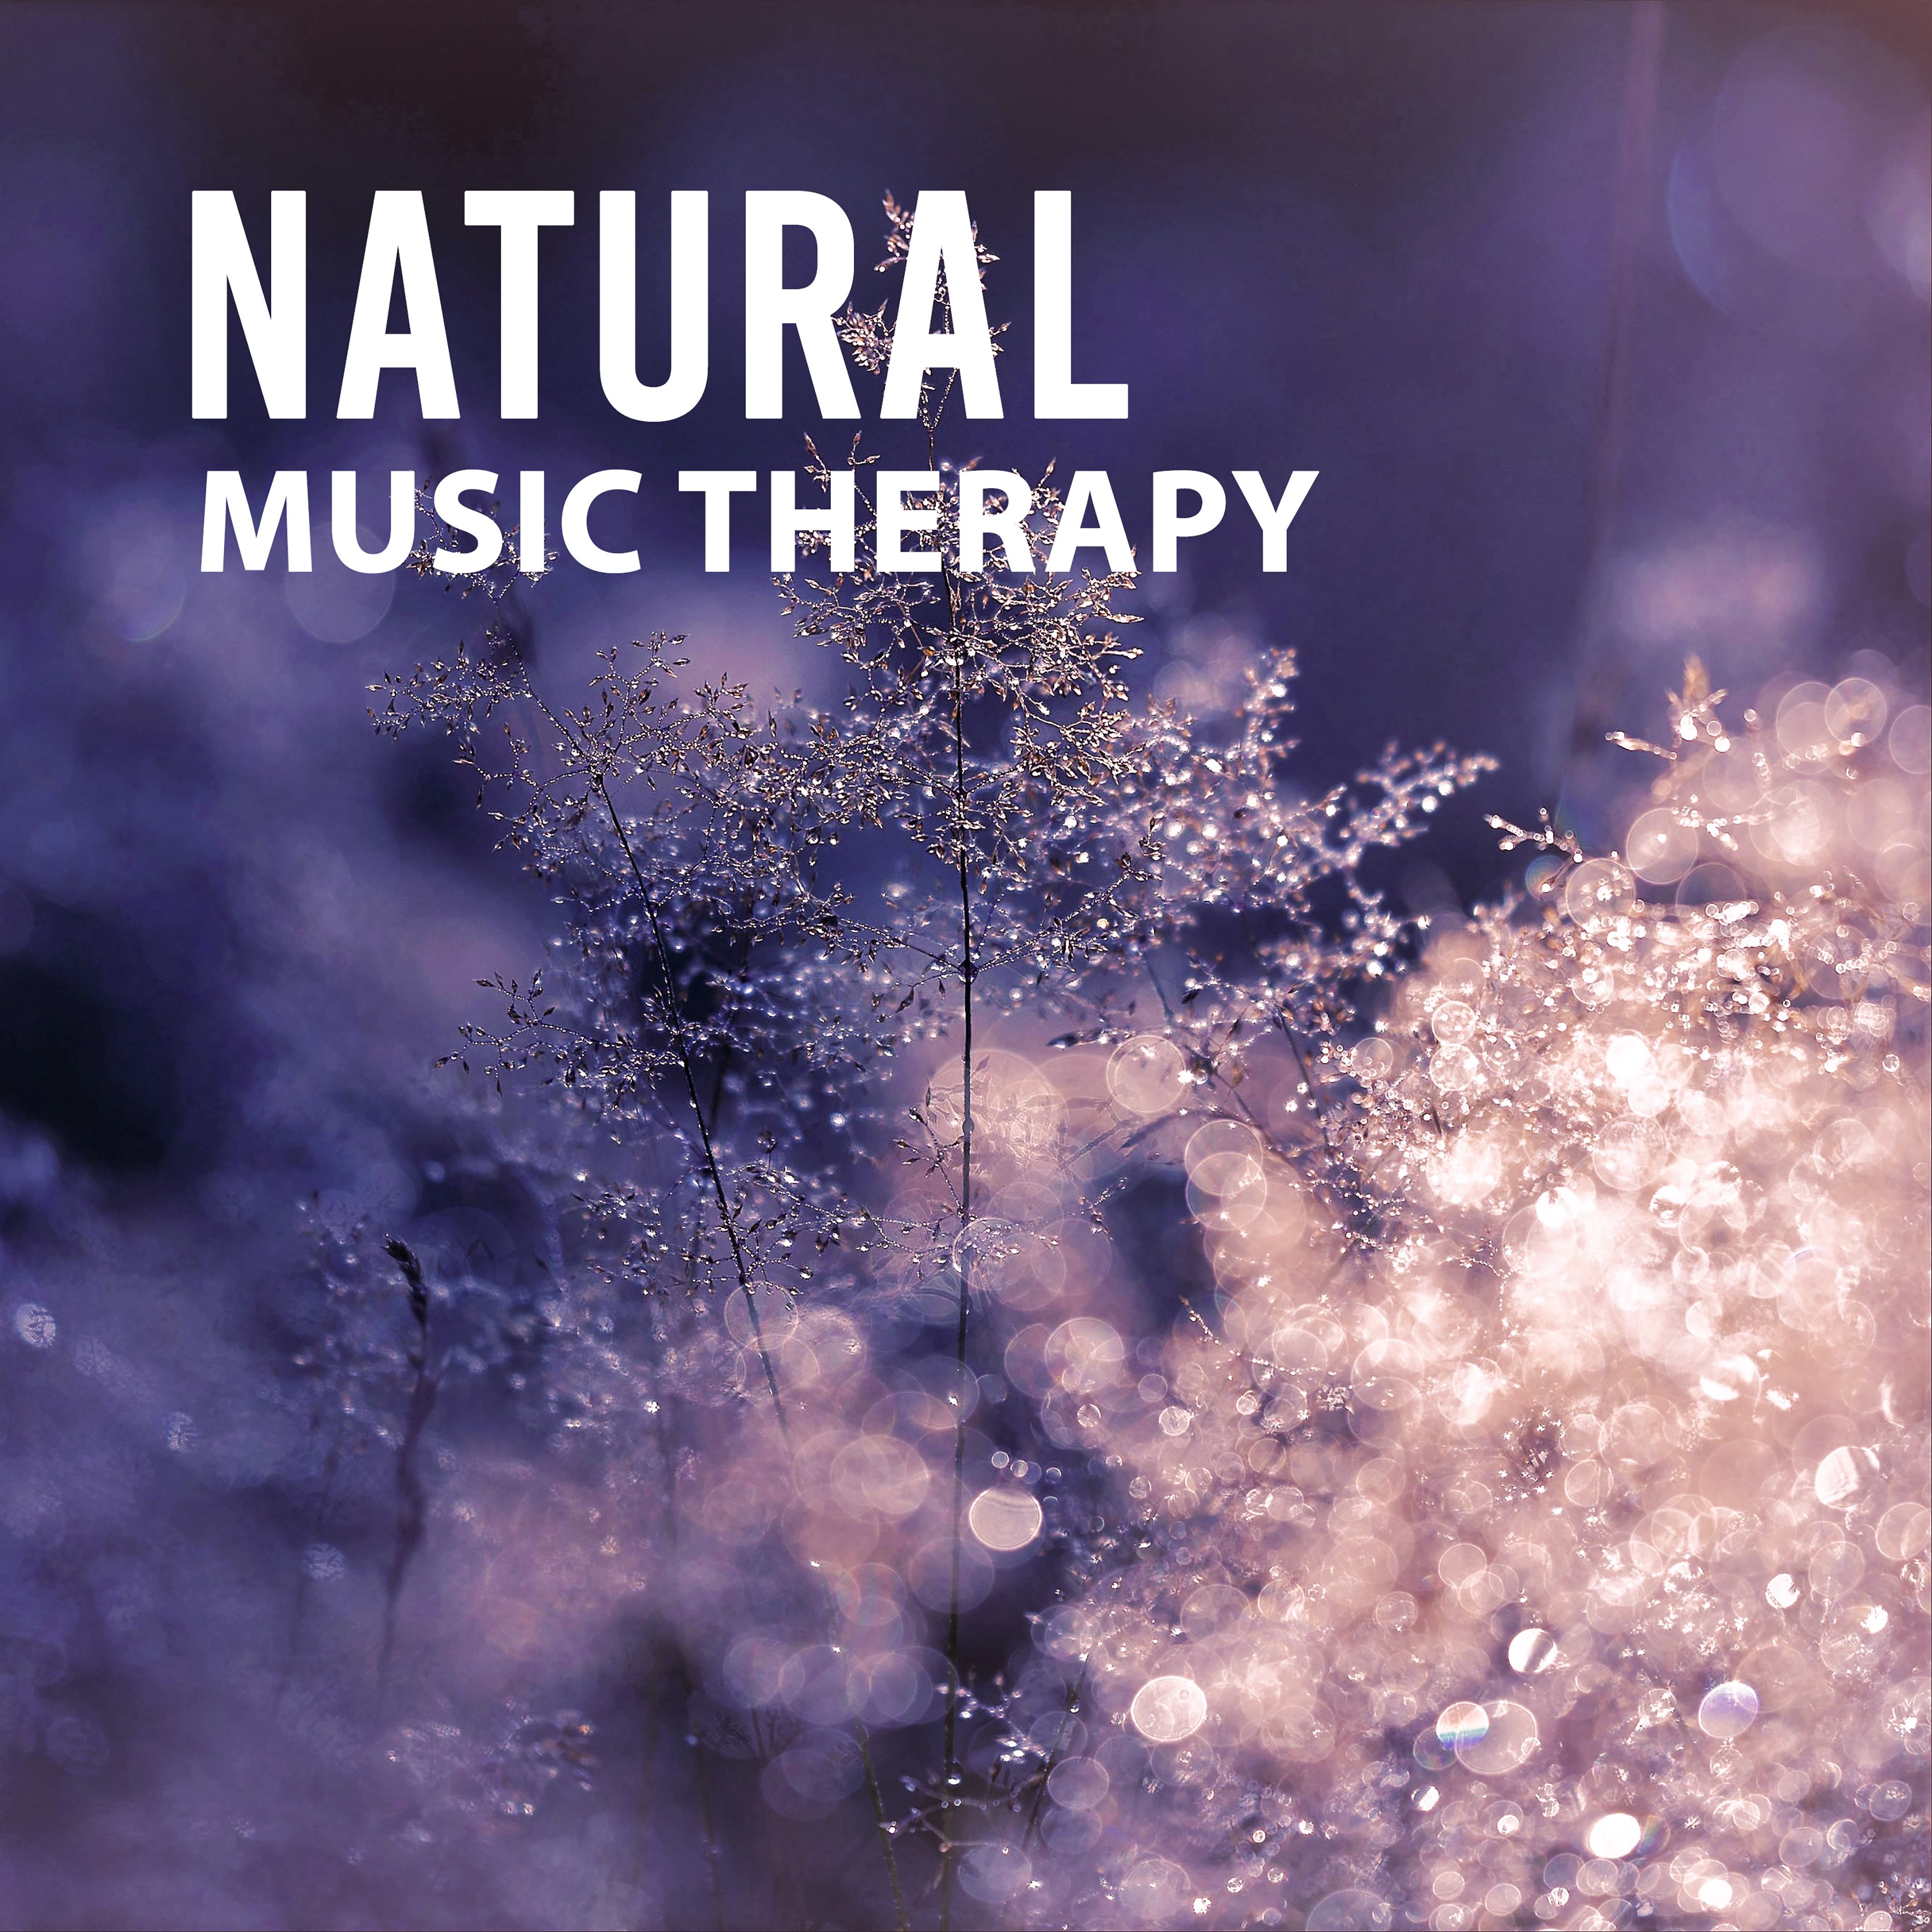 Natural Music Therapy – Relaxing Music, Full of Nature Sounds, Deep Relaxation, Meditation, Spa Music